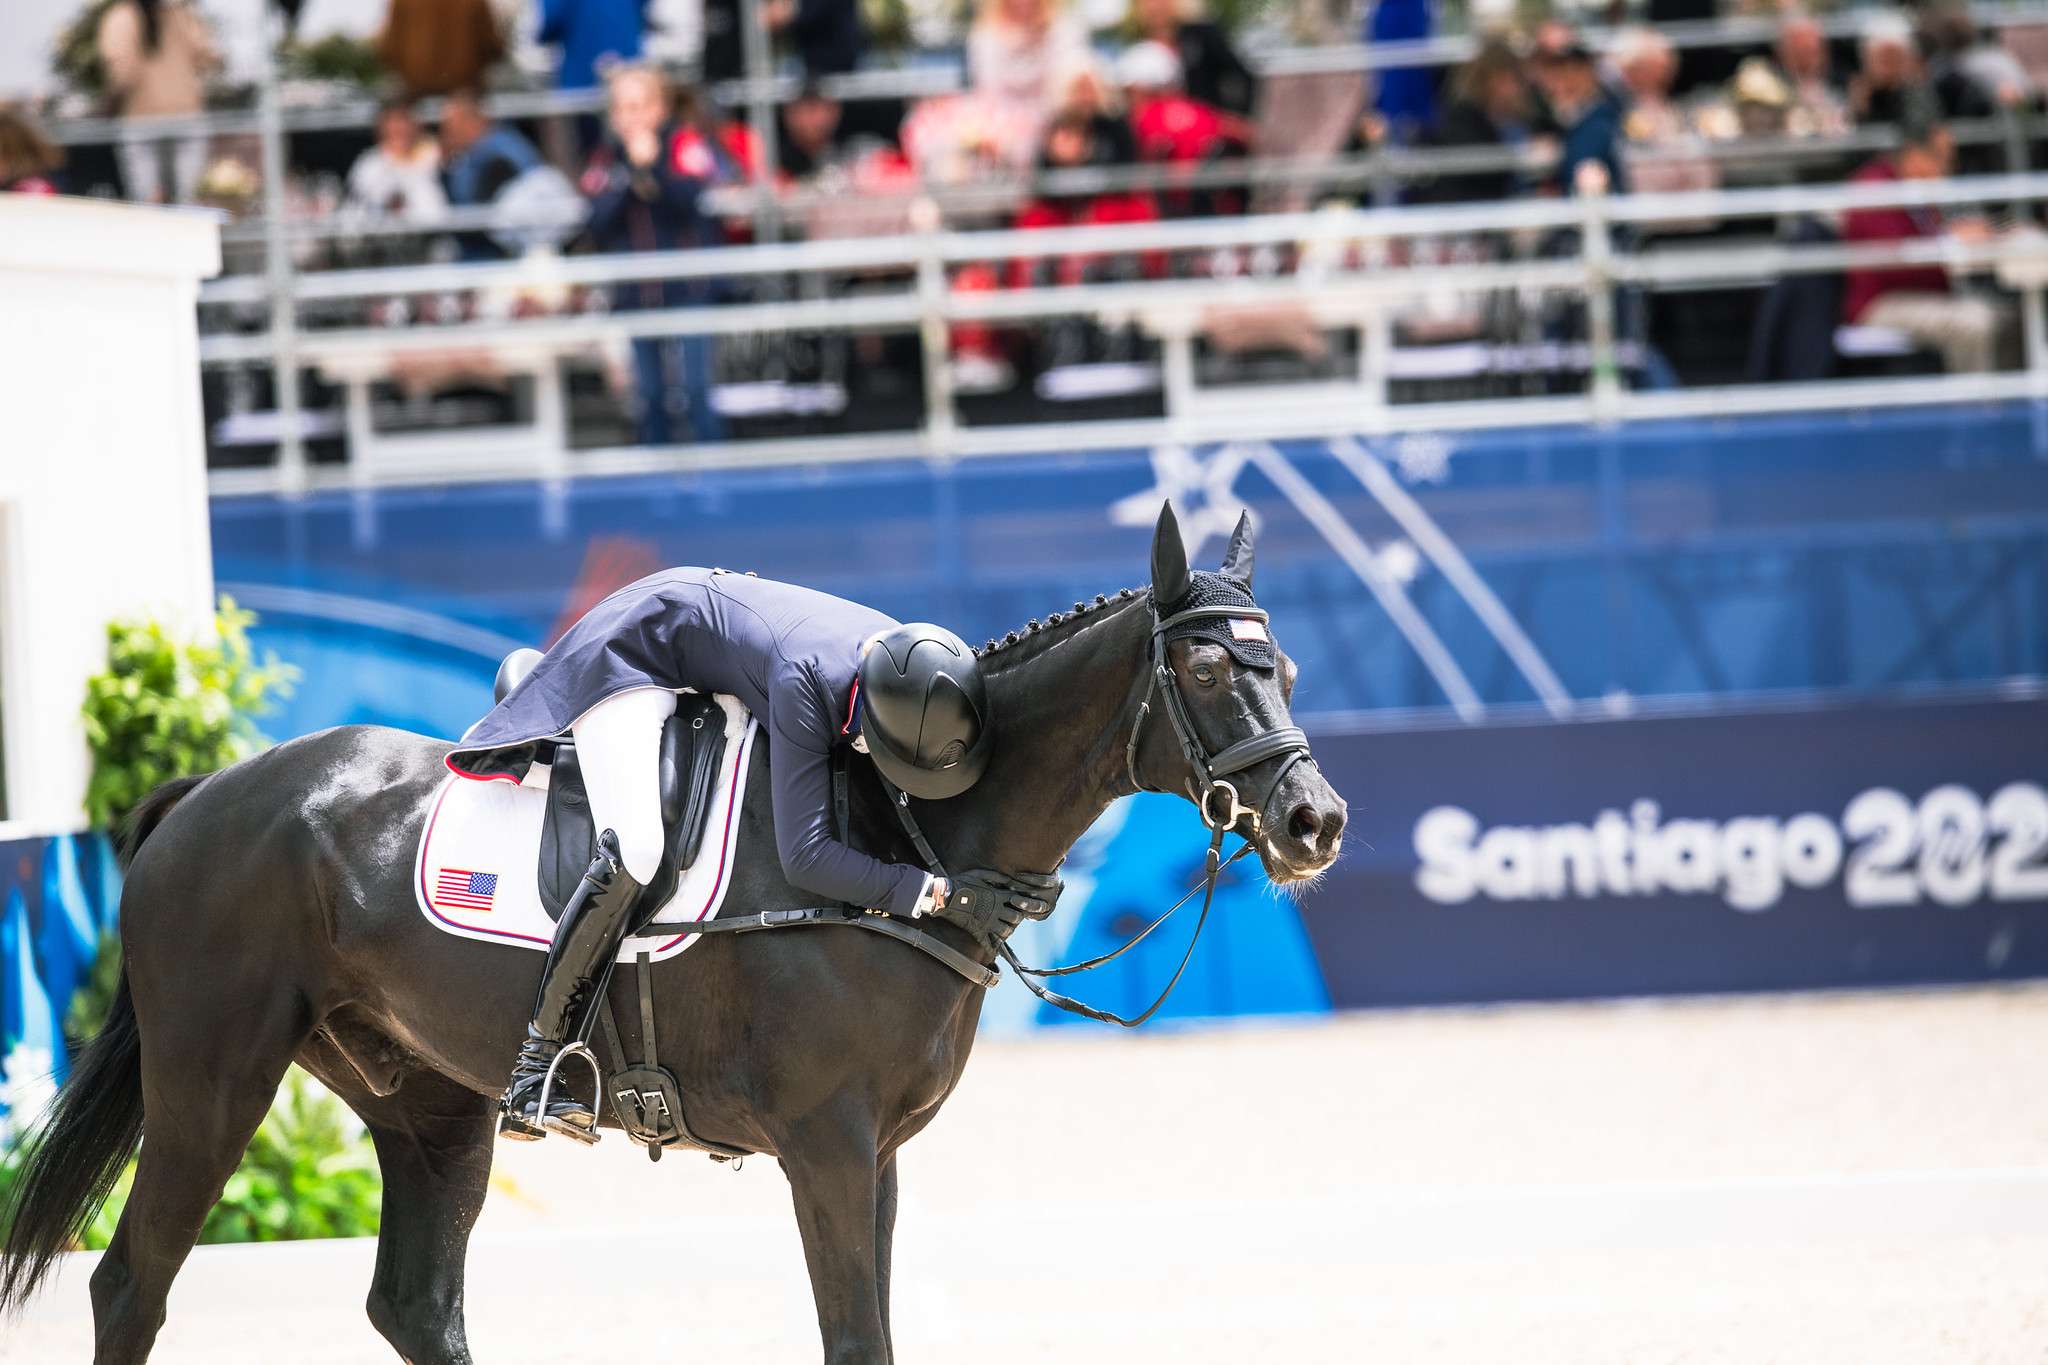 Pan American Games in Santiago, Chili 2023 -- Caroline PAMUKCU with
HSH Blake-USA-(USA) after dressage test in eventing at the Pan American Games Santiago, Chile 2023
 
Copyright ©FEI/Shannon Brinkman